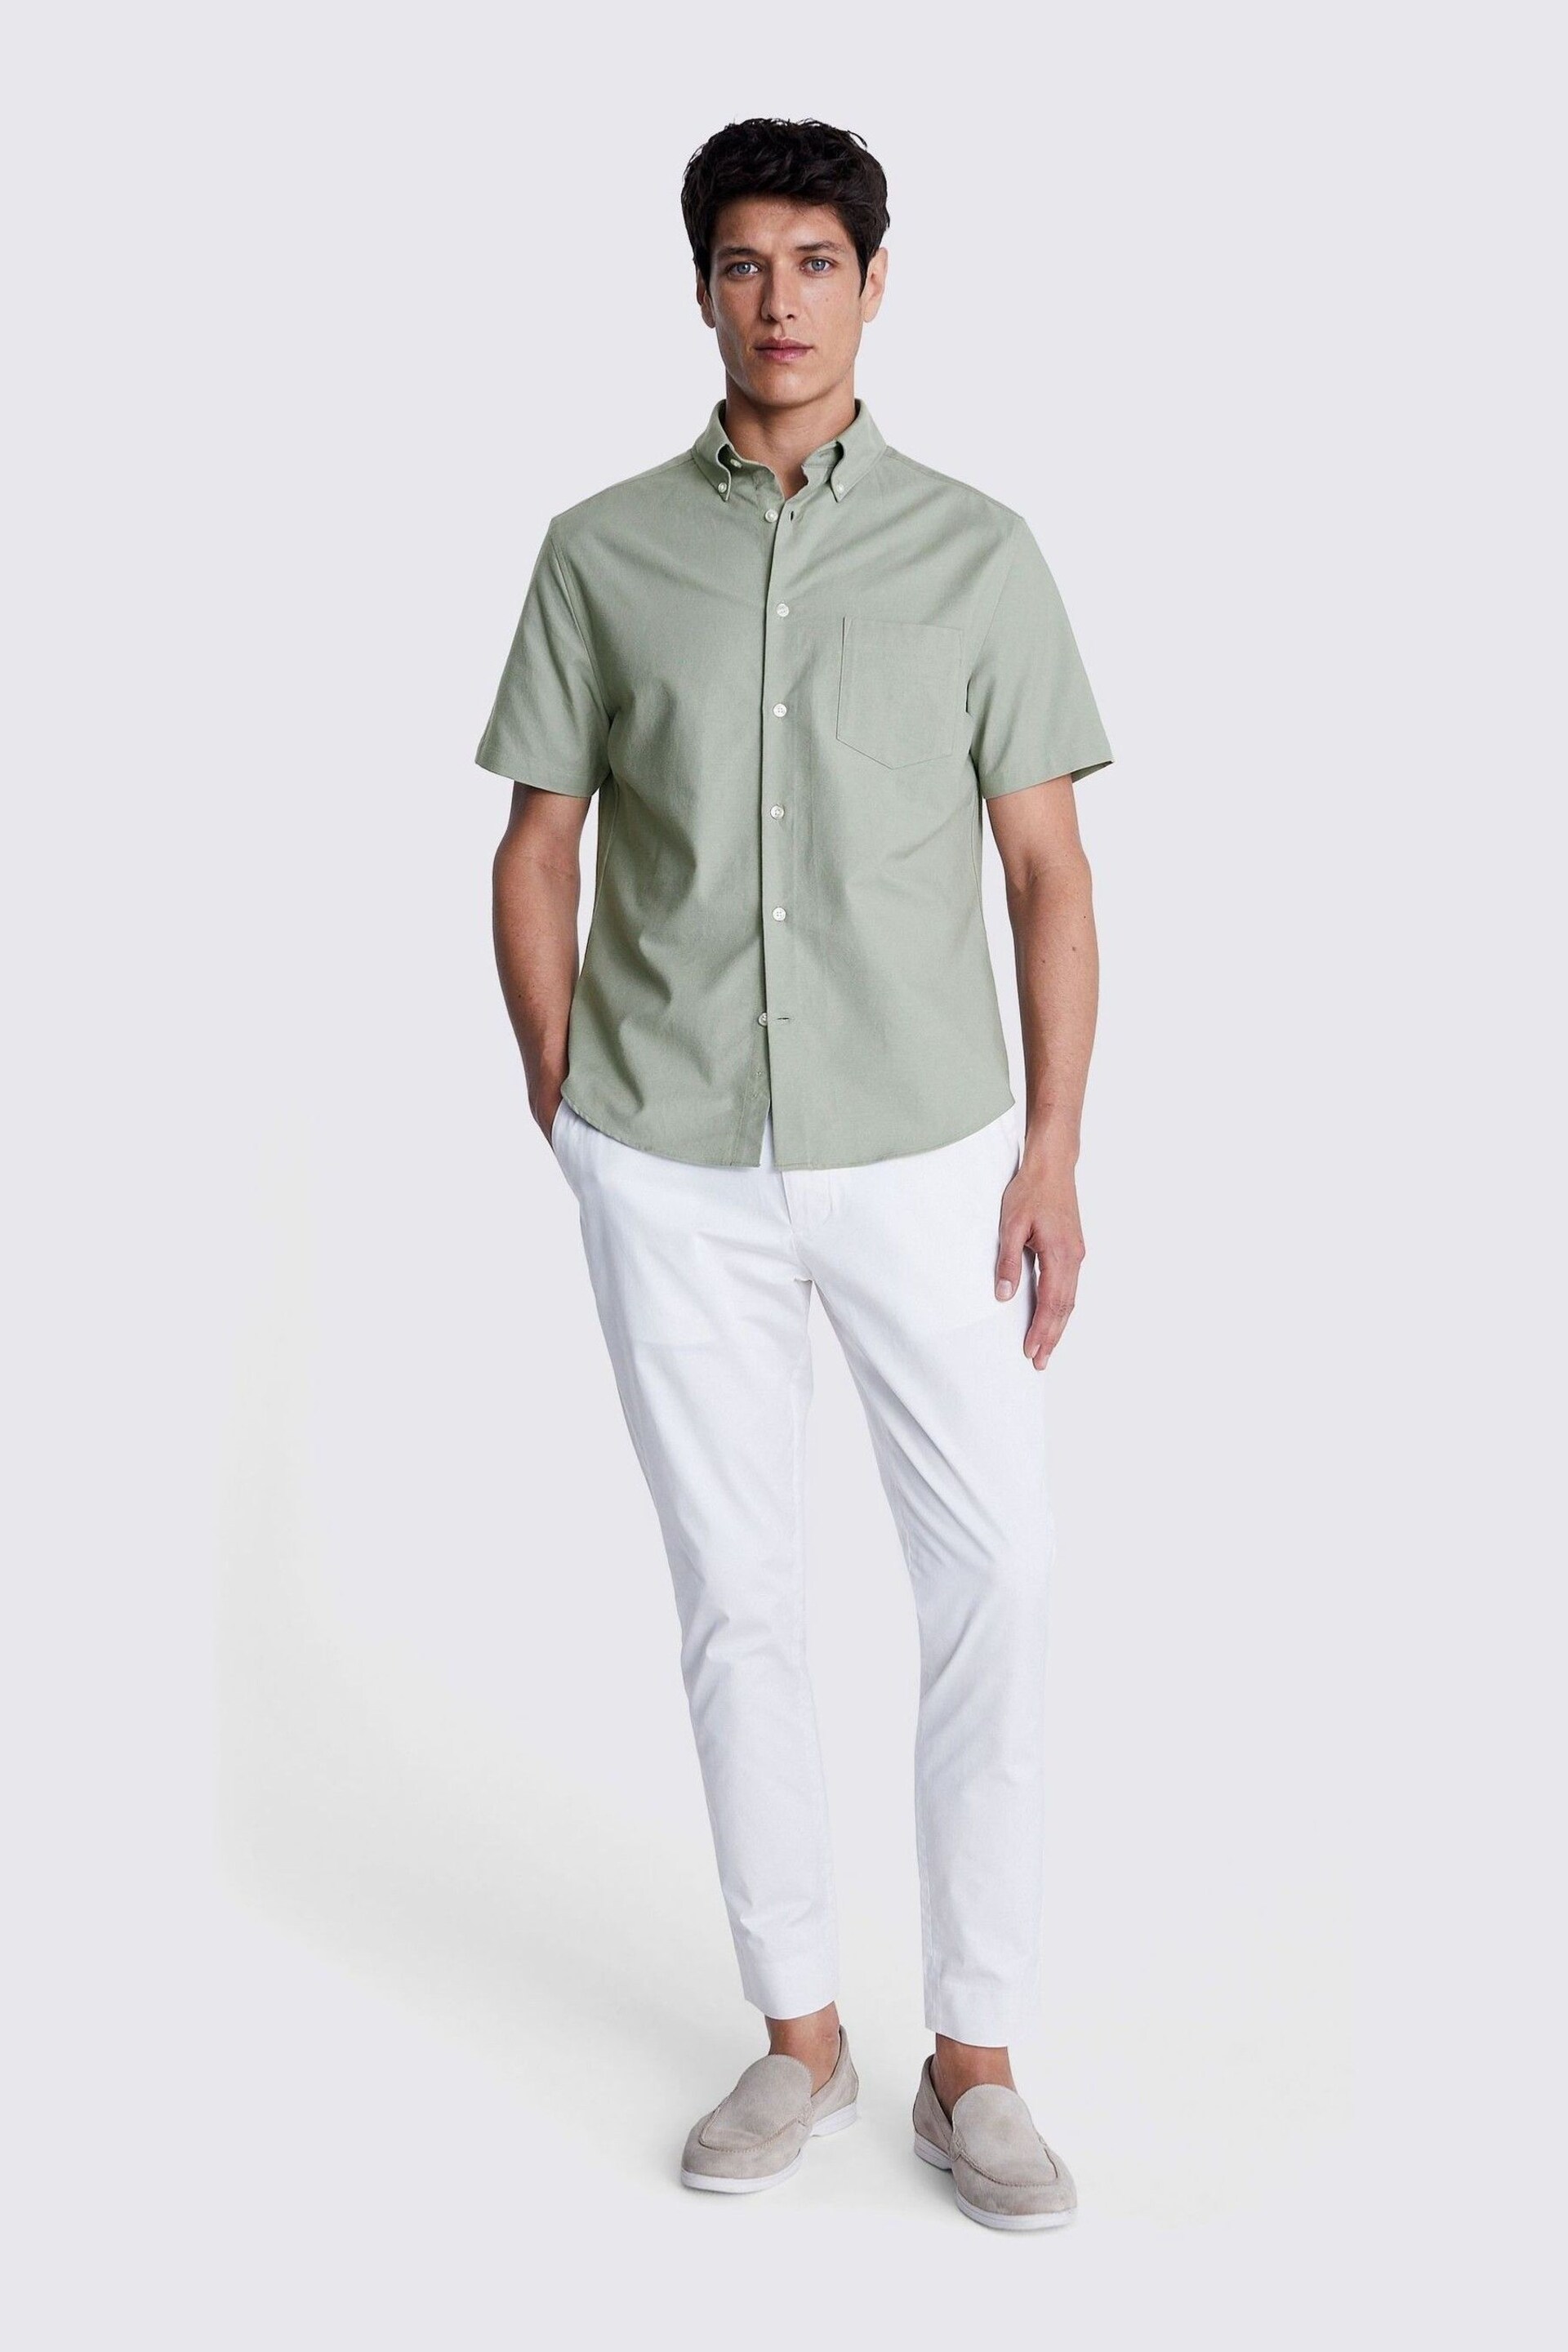 MOSS Sage Green Short Sleeve Washed Oxford Shirt - Image 3 of 6